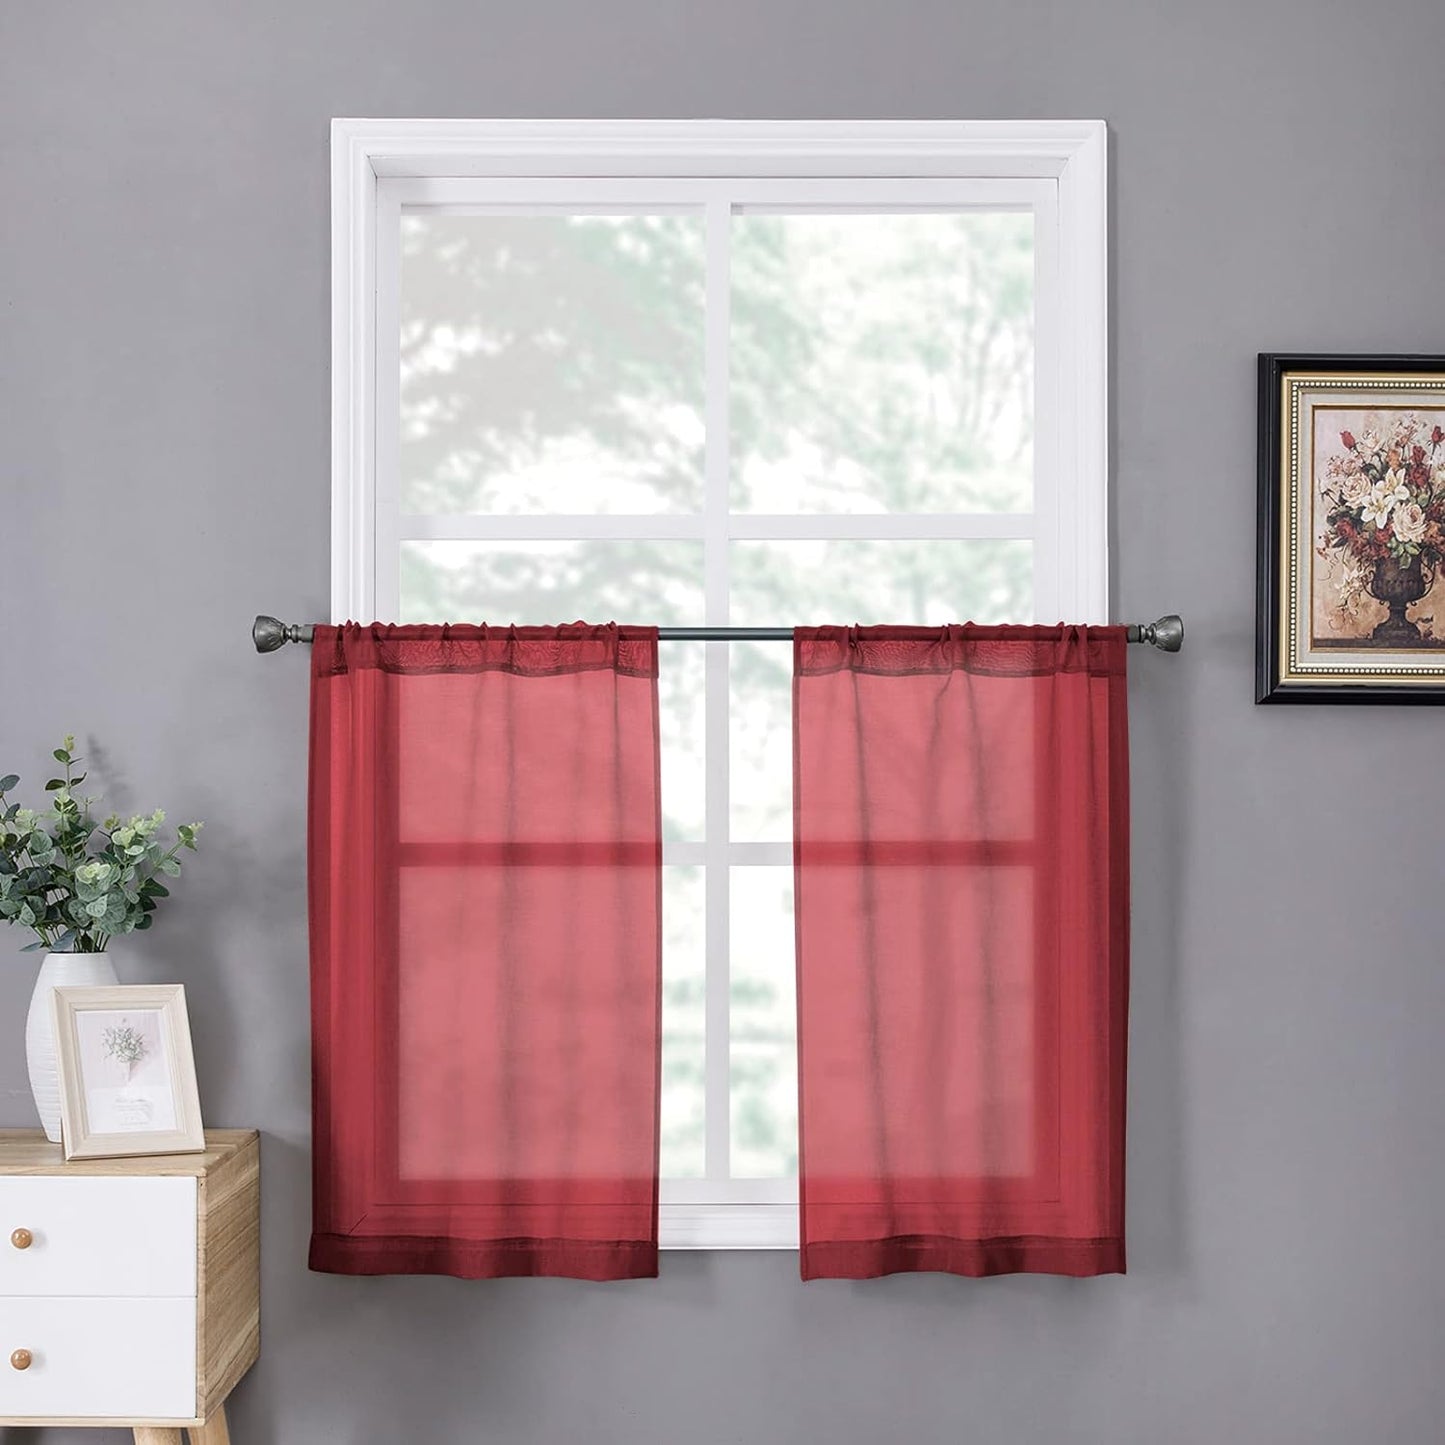 Tollpiz Short Sheer Curtains Linen Textured Bedroom Curtain Sheers Light Filtering Rod Pocket Voile Curtains for Living Room, 54 X 45 Inches Long, White, Set of 2 Panels  Tollpiz Tex Burgundy Red 25"W X 36"L 